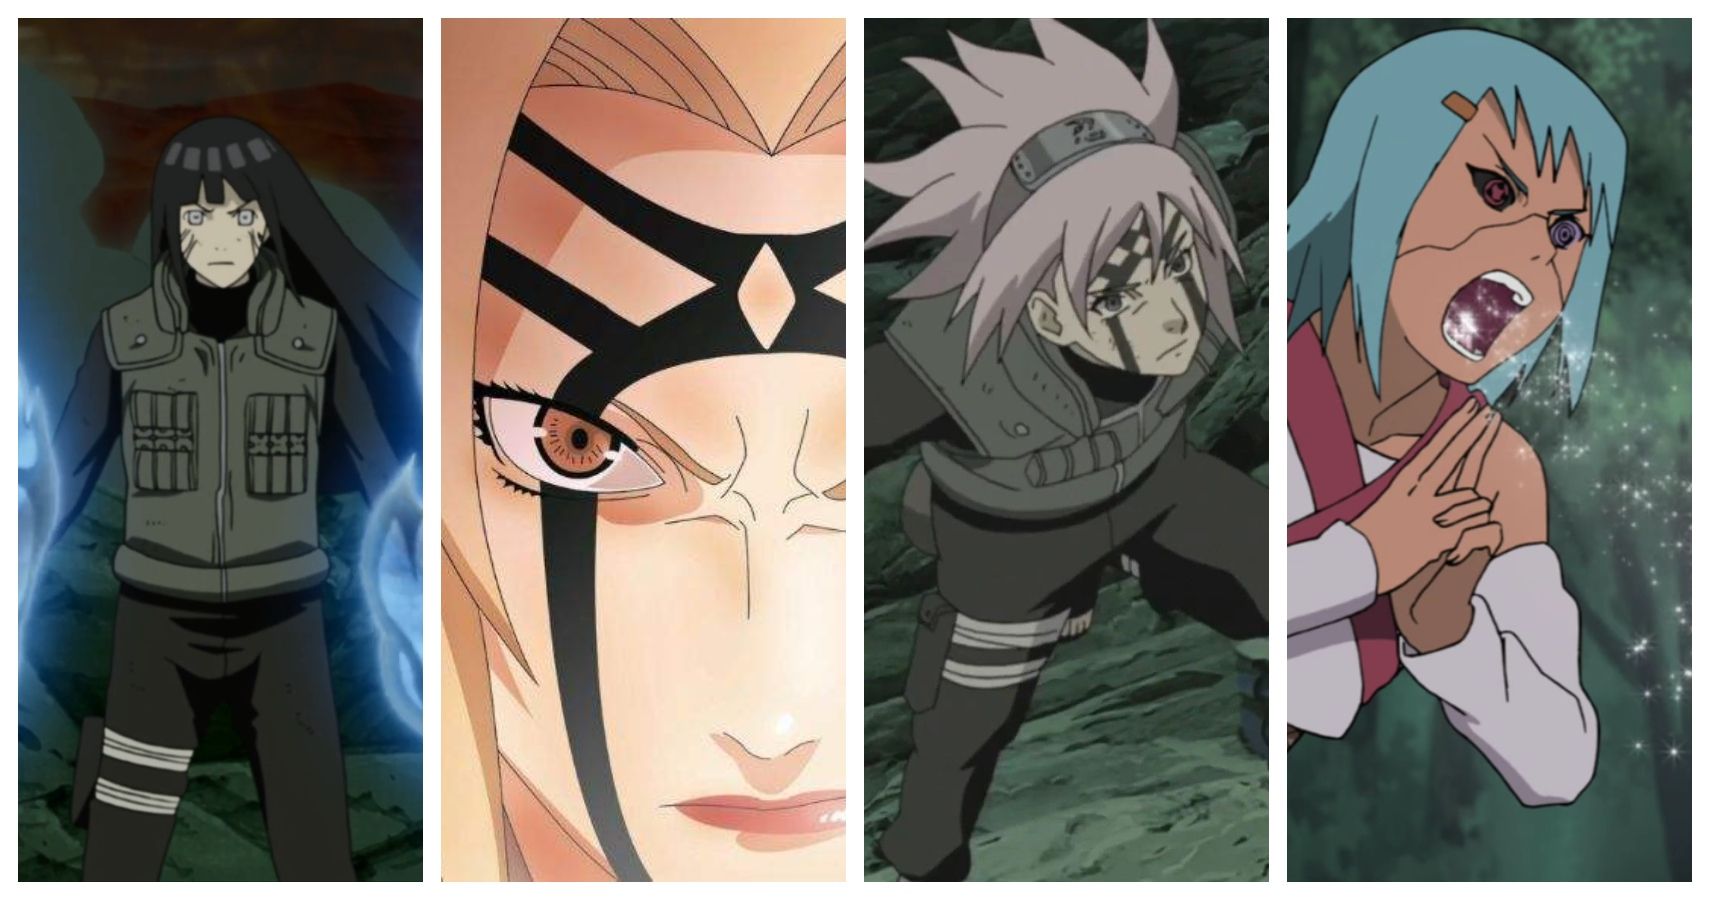 The 15 Strongest Women In Naruto, Ranked According To Strength